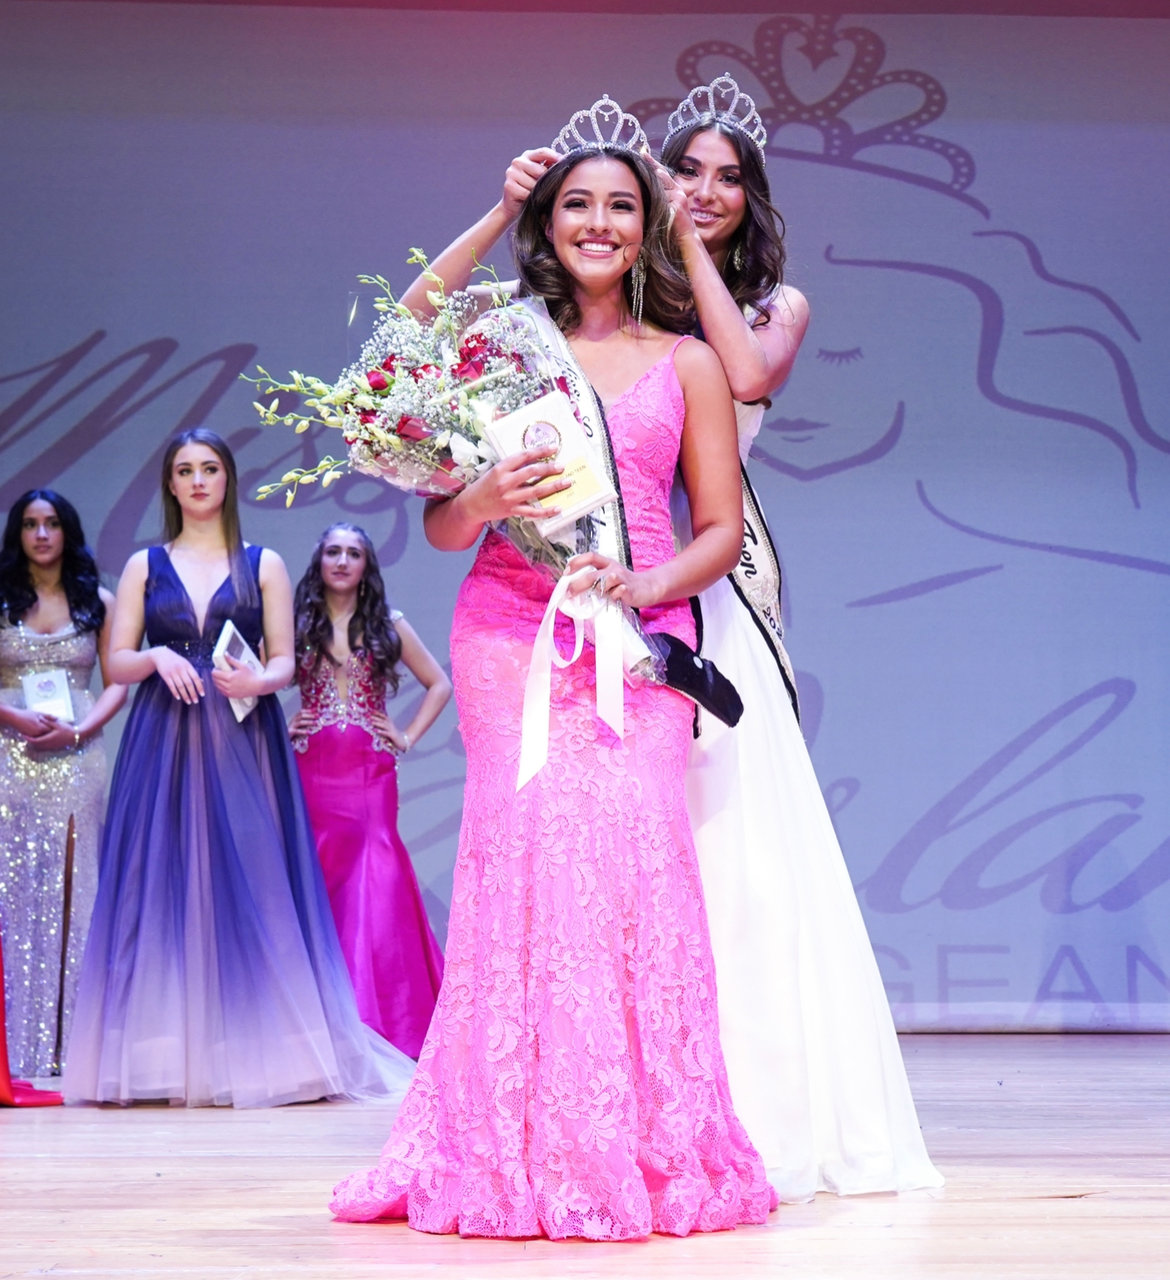 Natalia Suaza, from Valley Stream, was crowned Miss Teen Long Island 2023 at Madison Theatre at Molloy College Nov. 20.